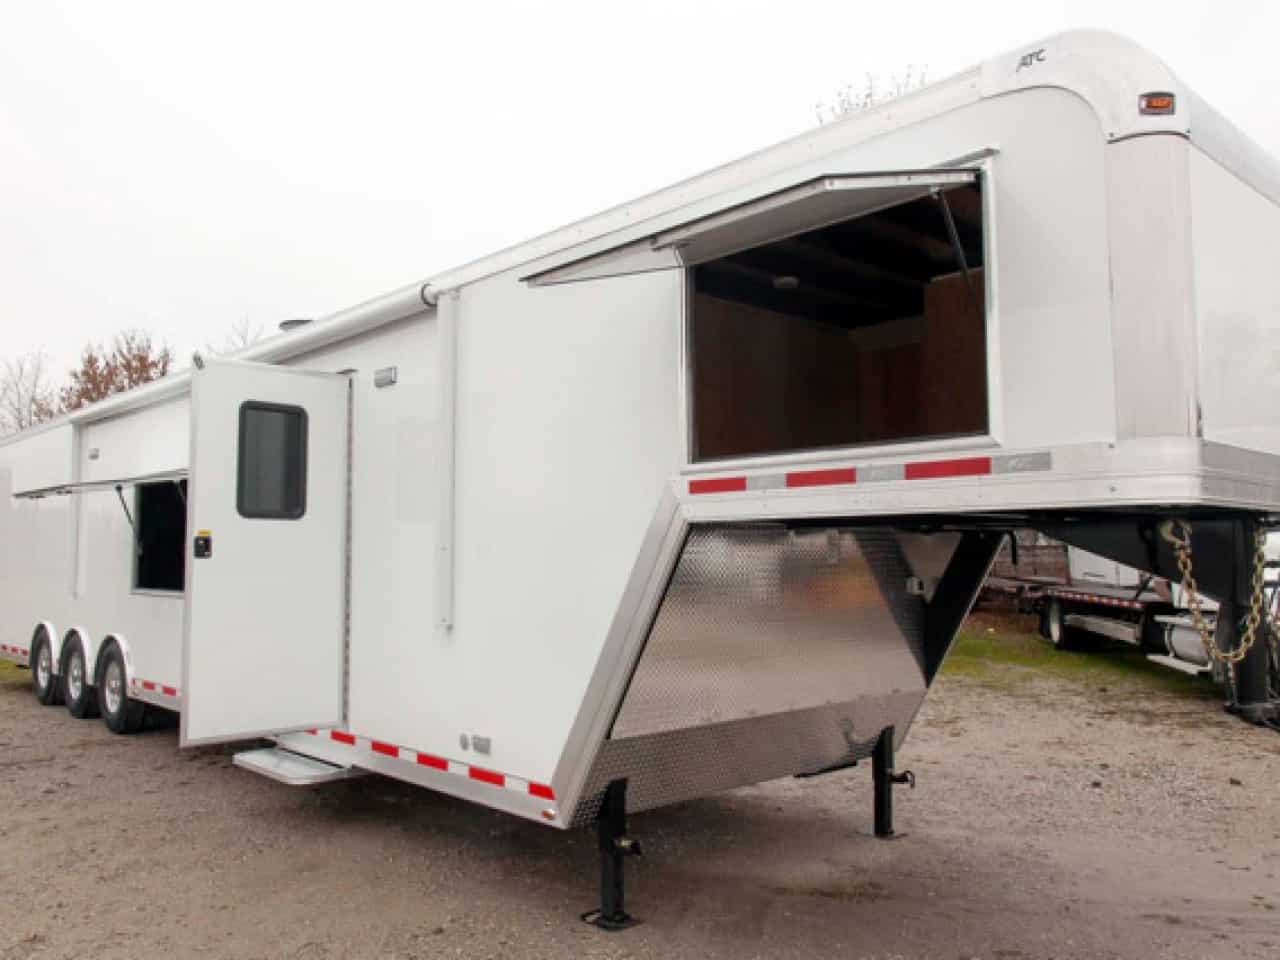 44 ft travel trailers